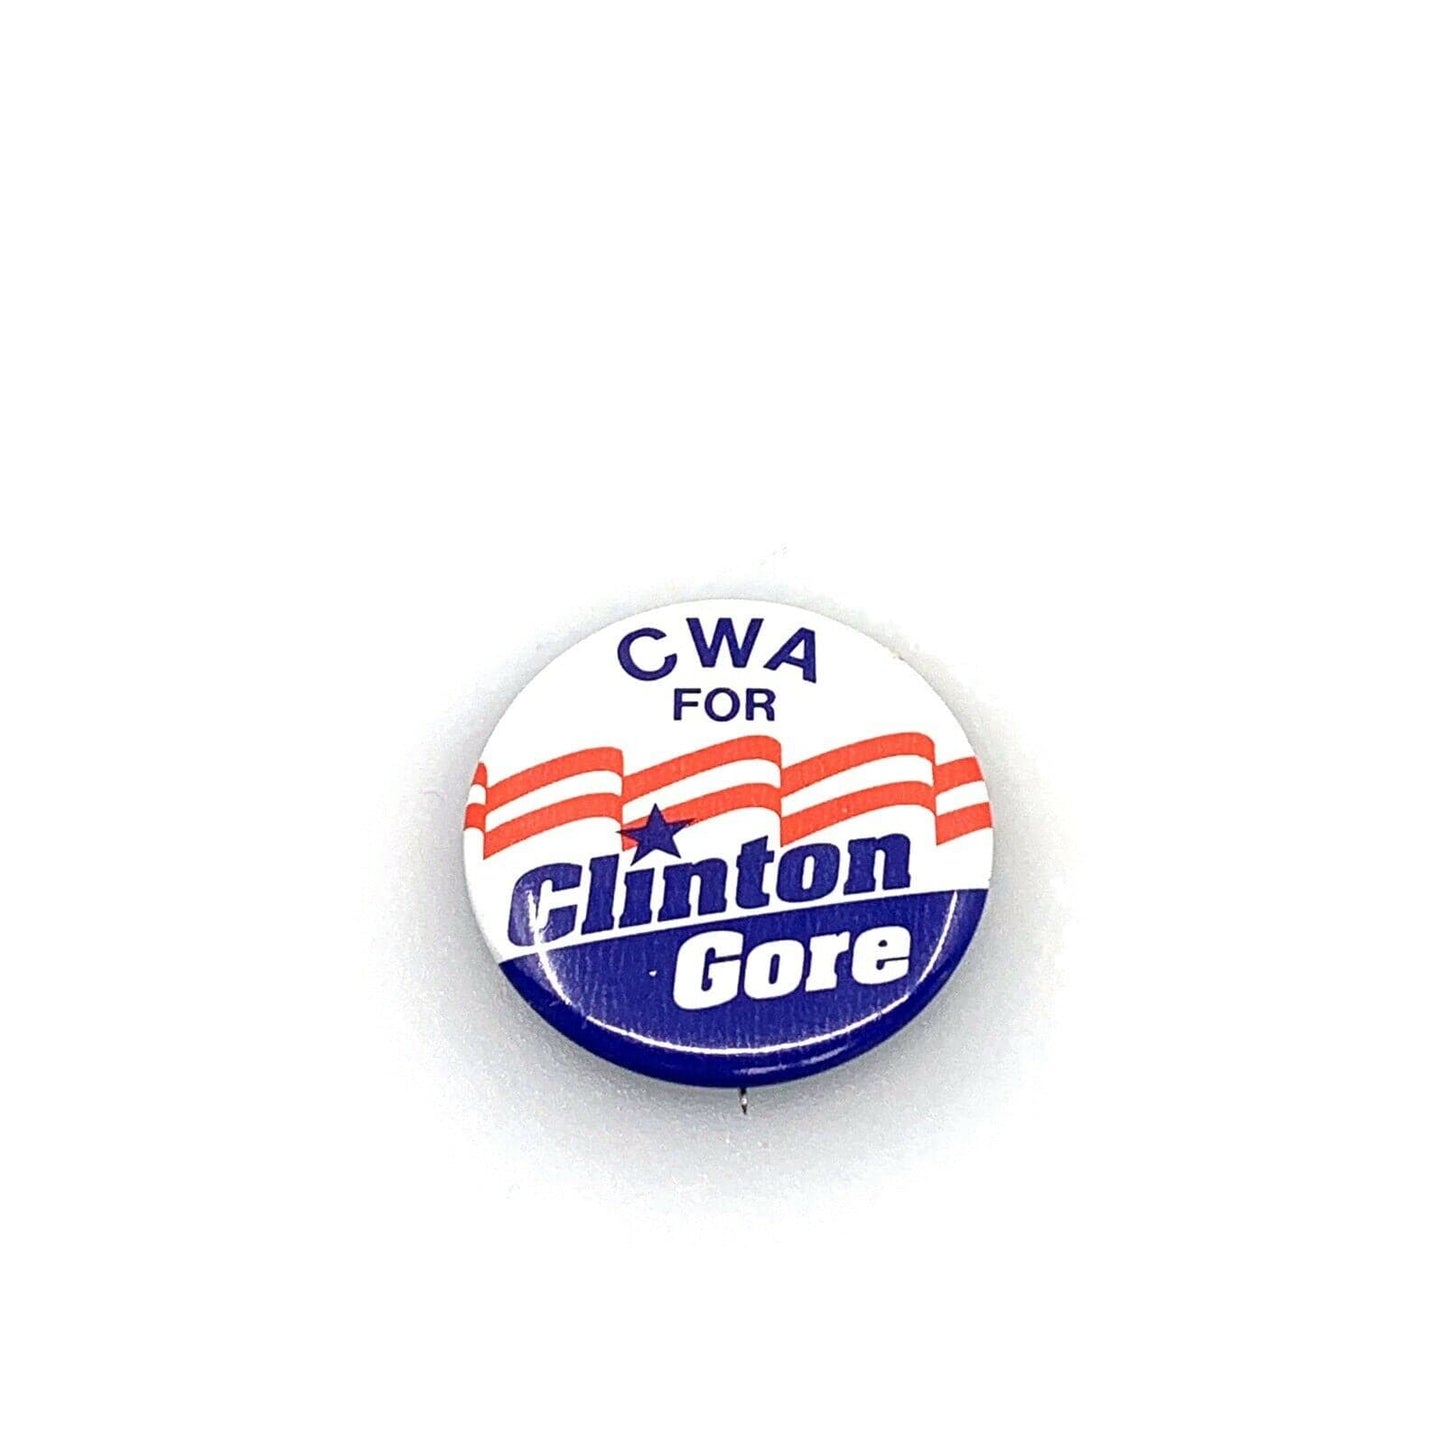 Vintage Communication Workers Of America Union Button Pin Badge - CWA For Clinton Gore